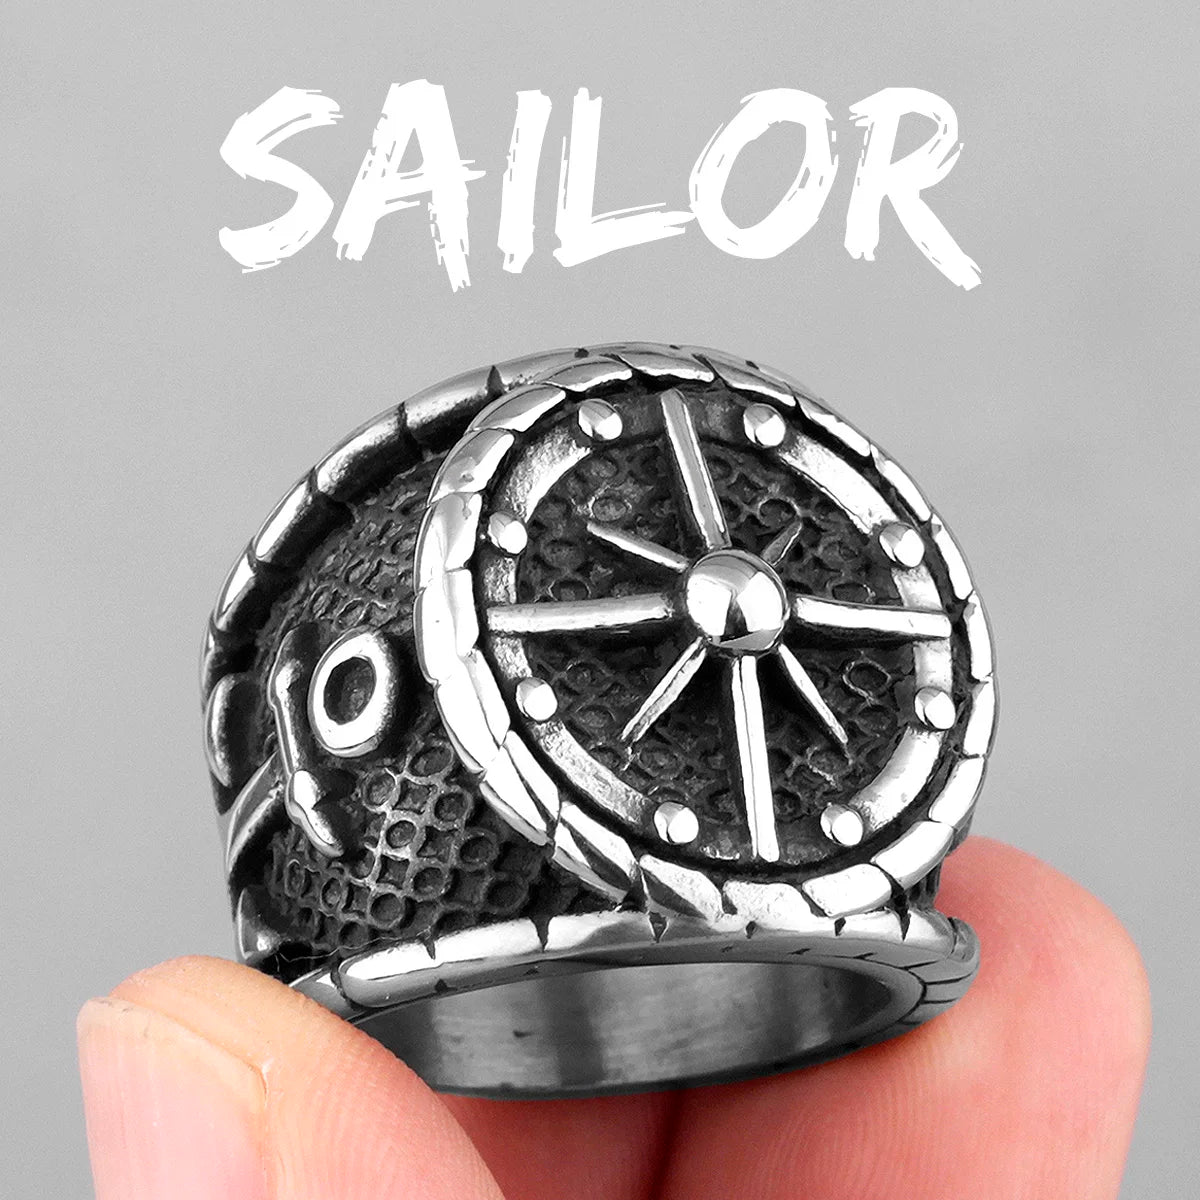 Anchor Lighthouse Ocean Sailor Ship Men Rings Stainless Steel Women Jewelry Vintage Punk Rock Fashion Accessories Gift R622-Sailor